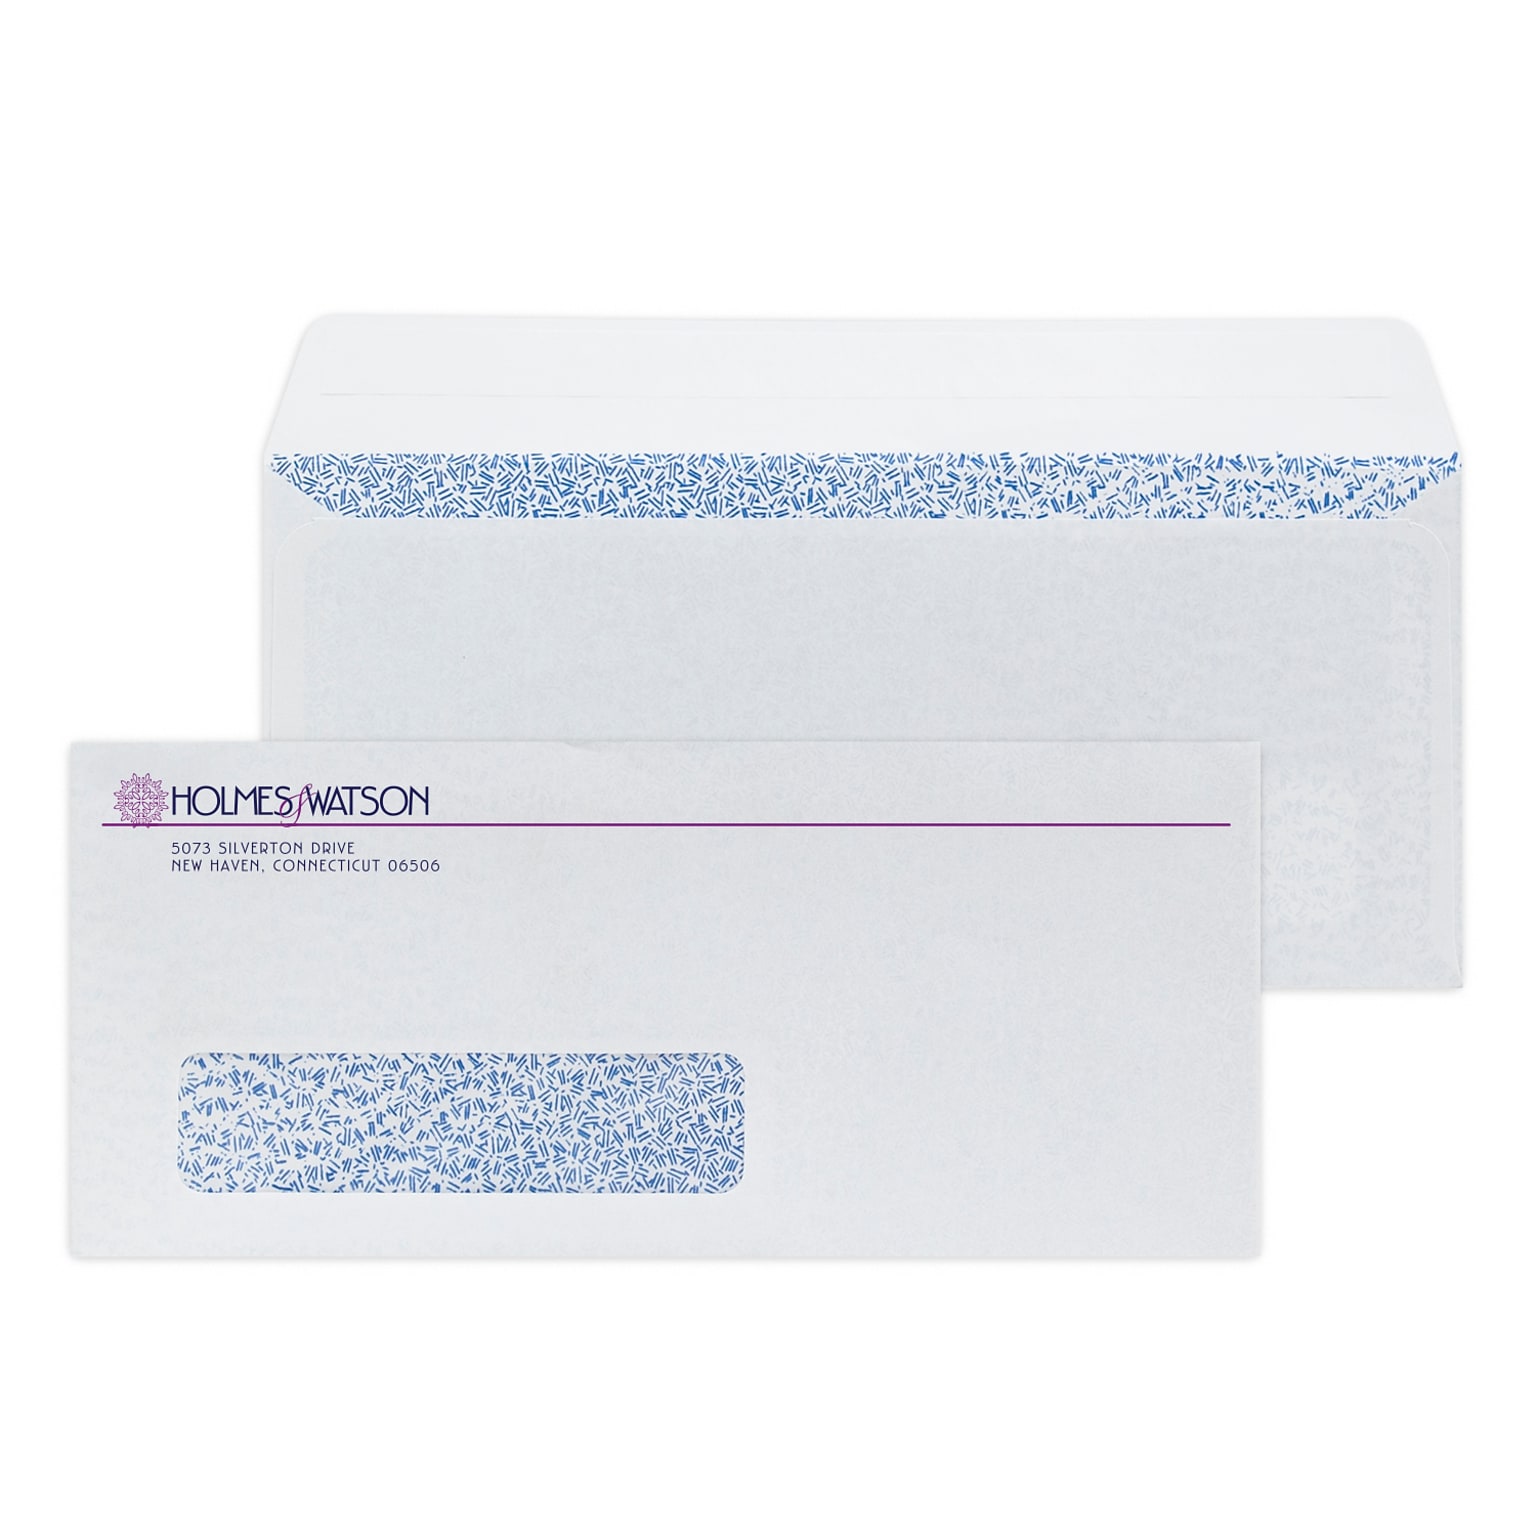 Custom #10 Peel and Seal Window Envelopes with Security Tint, 4 1/4 x 9 1/2, 24# White Wove, 2 Custom Inks, 250 / Pack